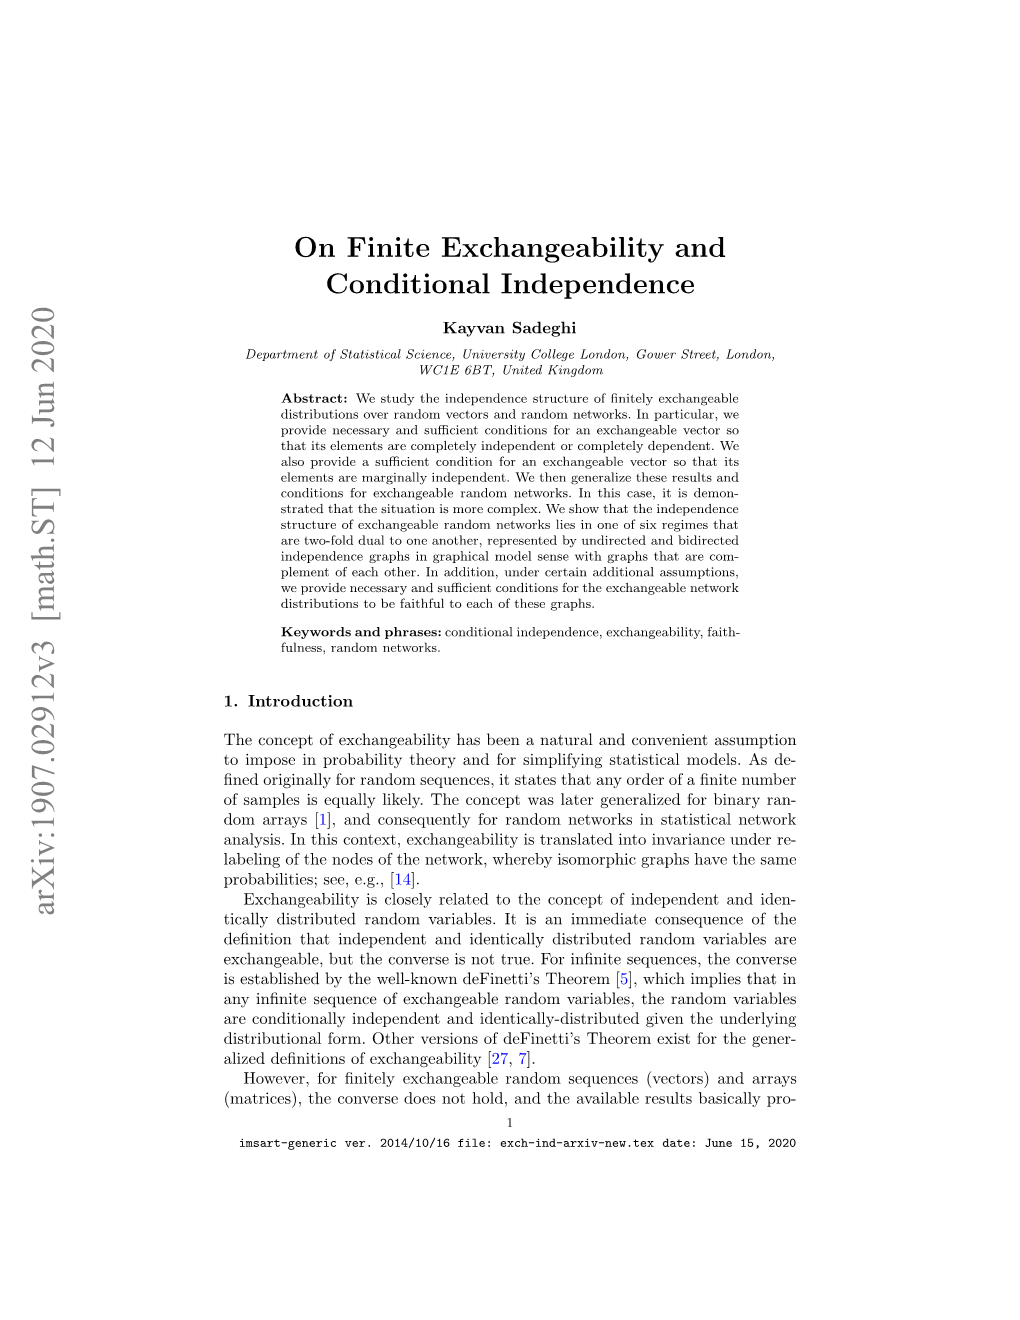 On Finite Exchangeability and Conditional Independence 2 Vide Approximations of the Inﬁnite Case; See, E.G., [6, 21, 15]